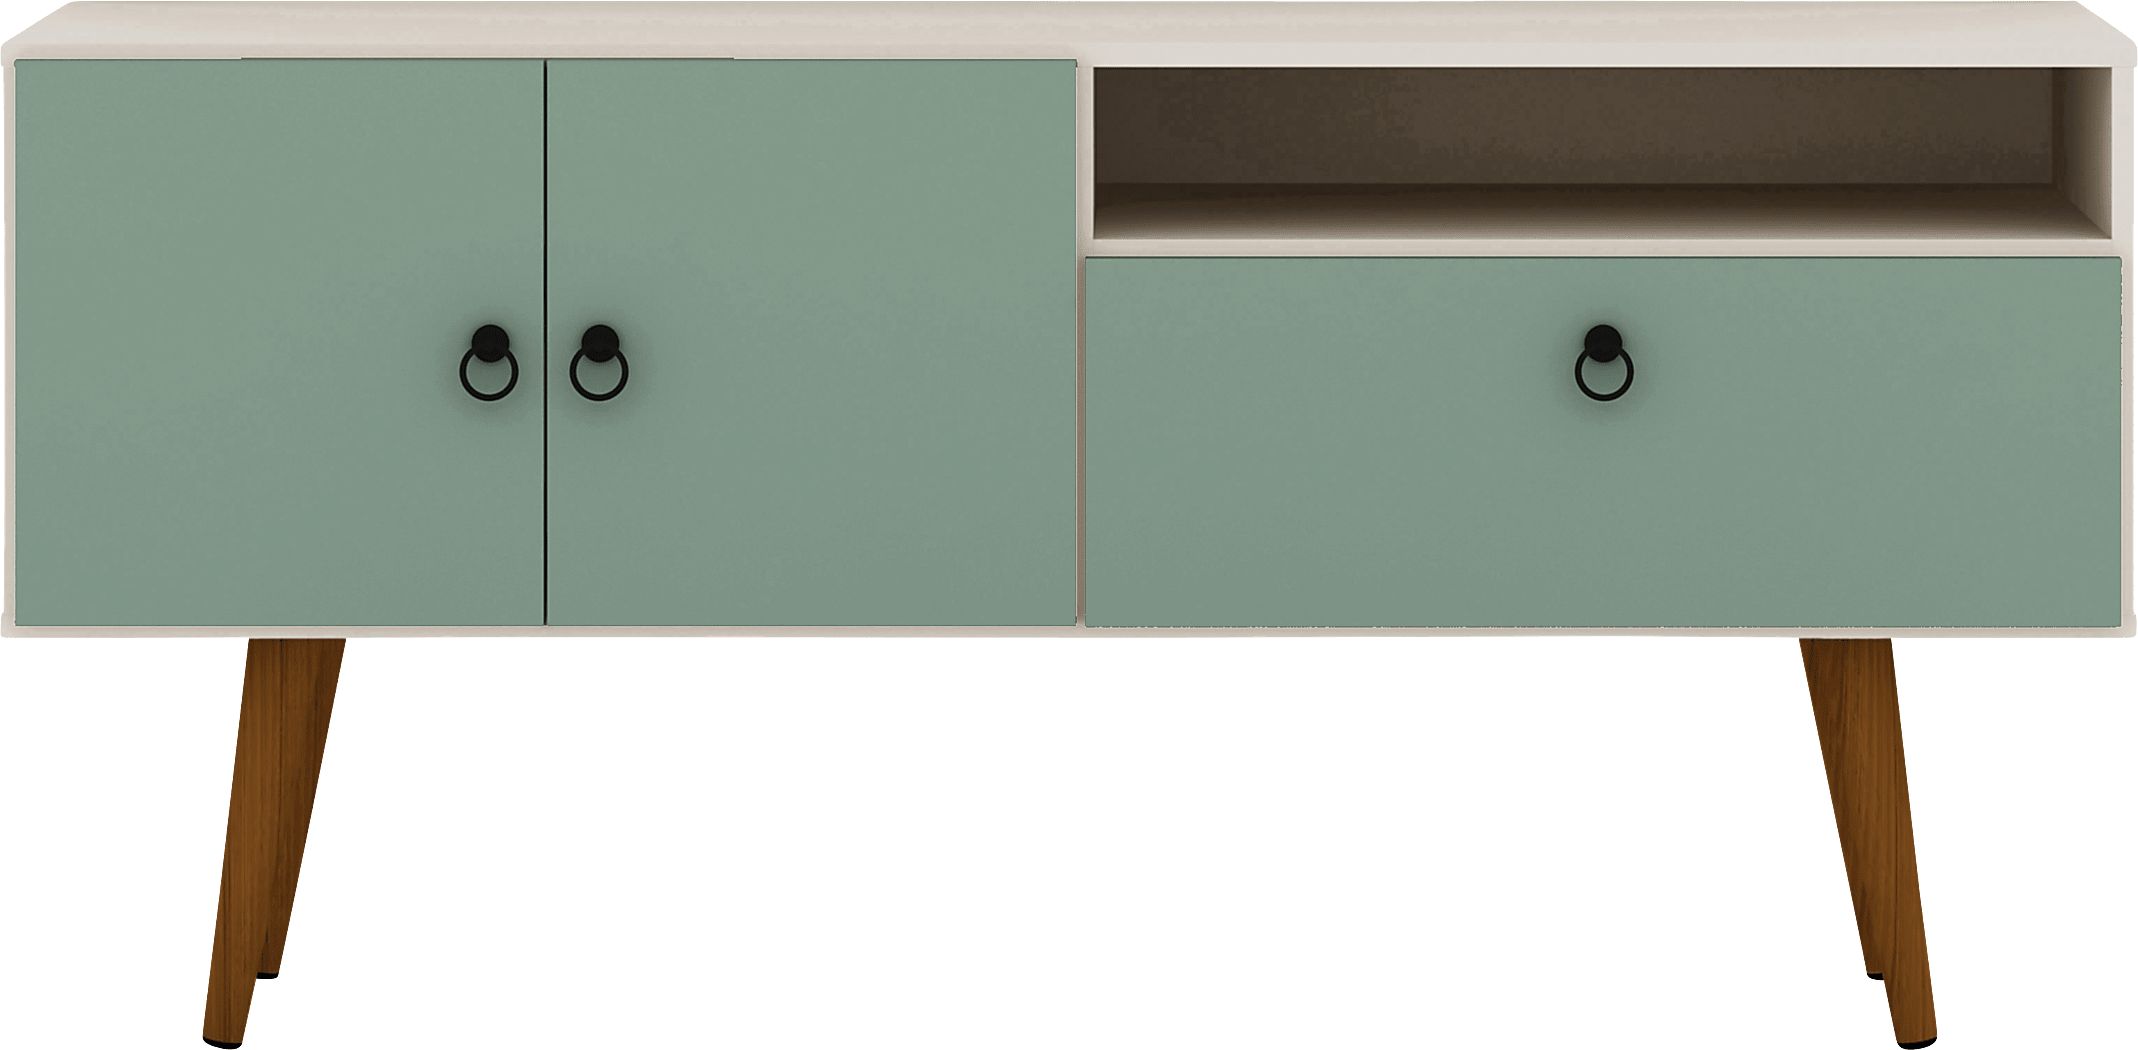 Veblem Green 54 in. Console